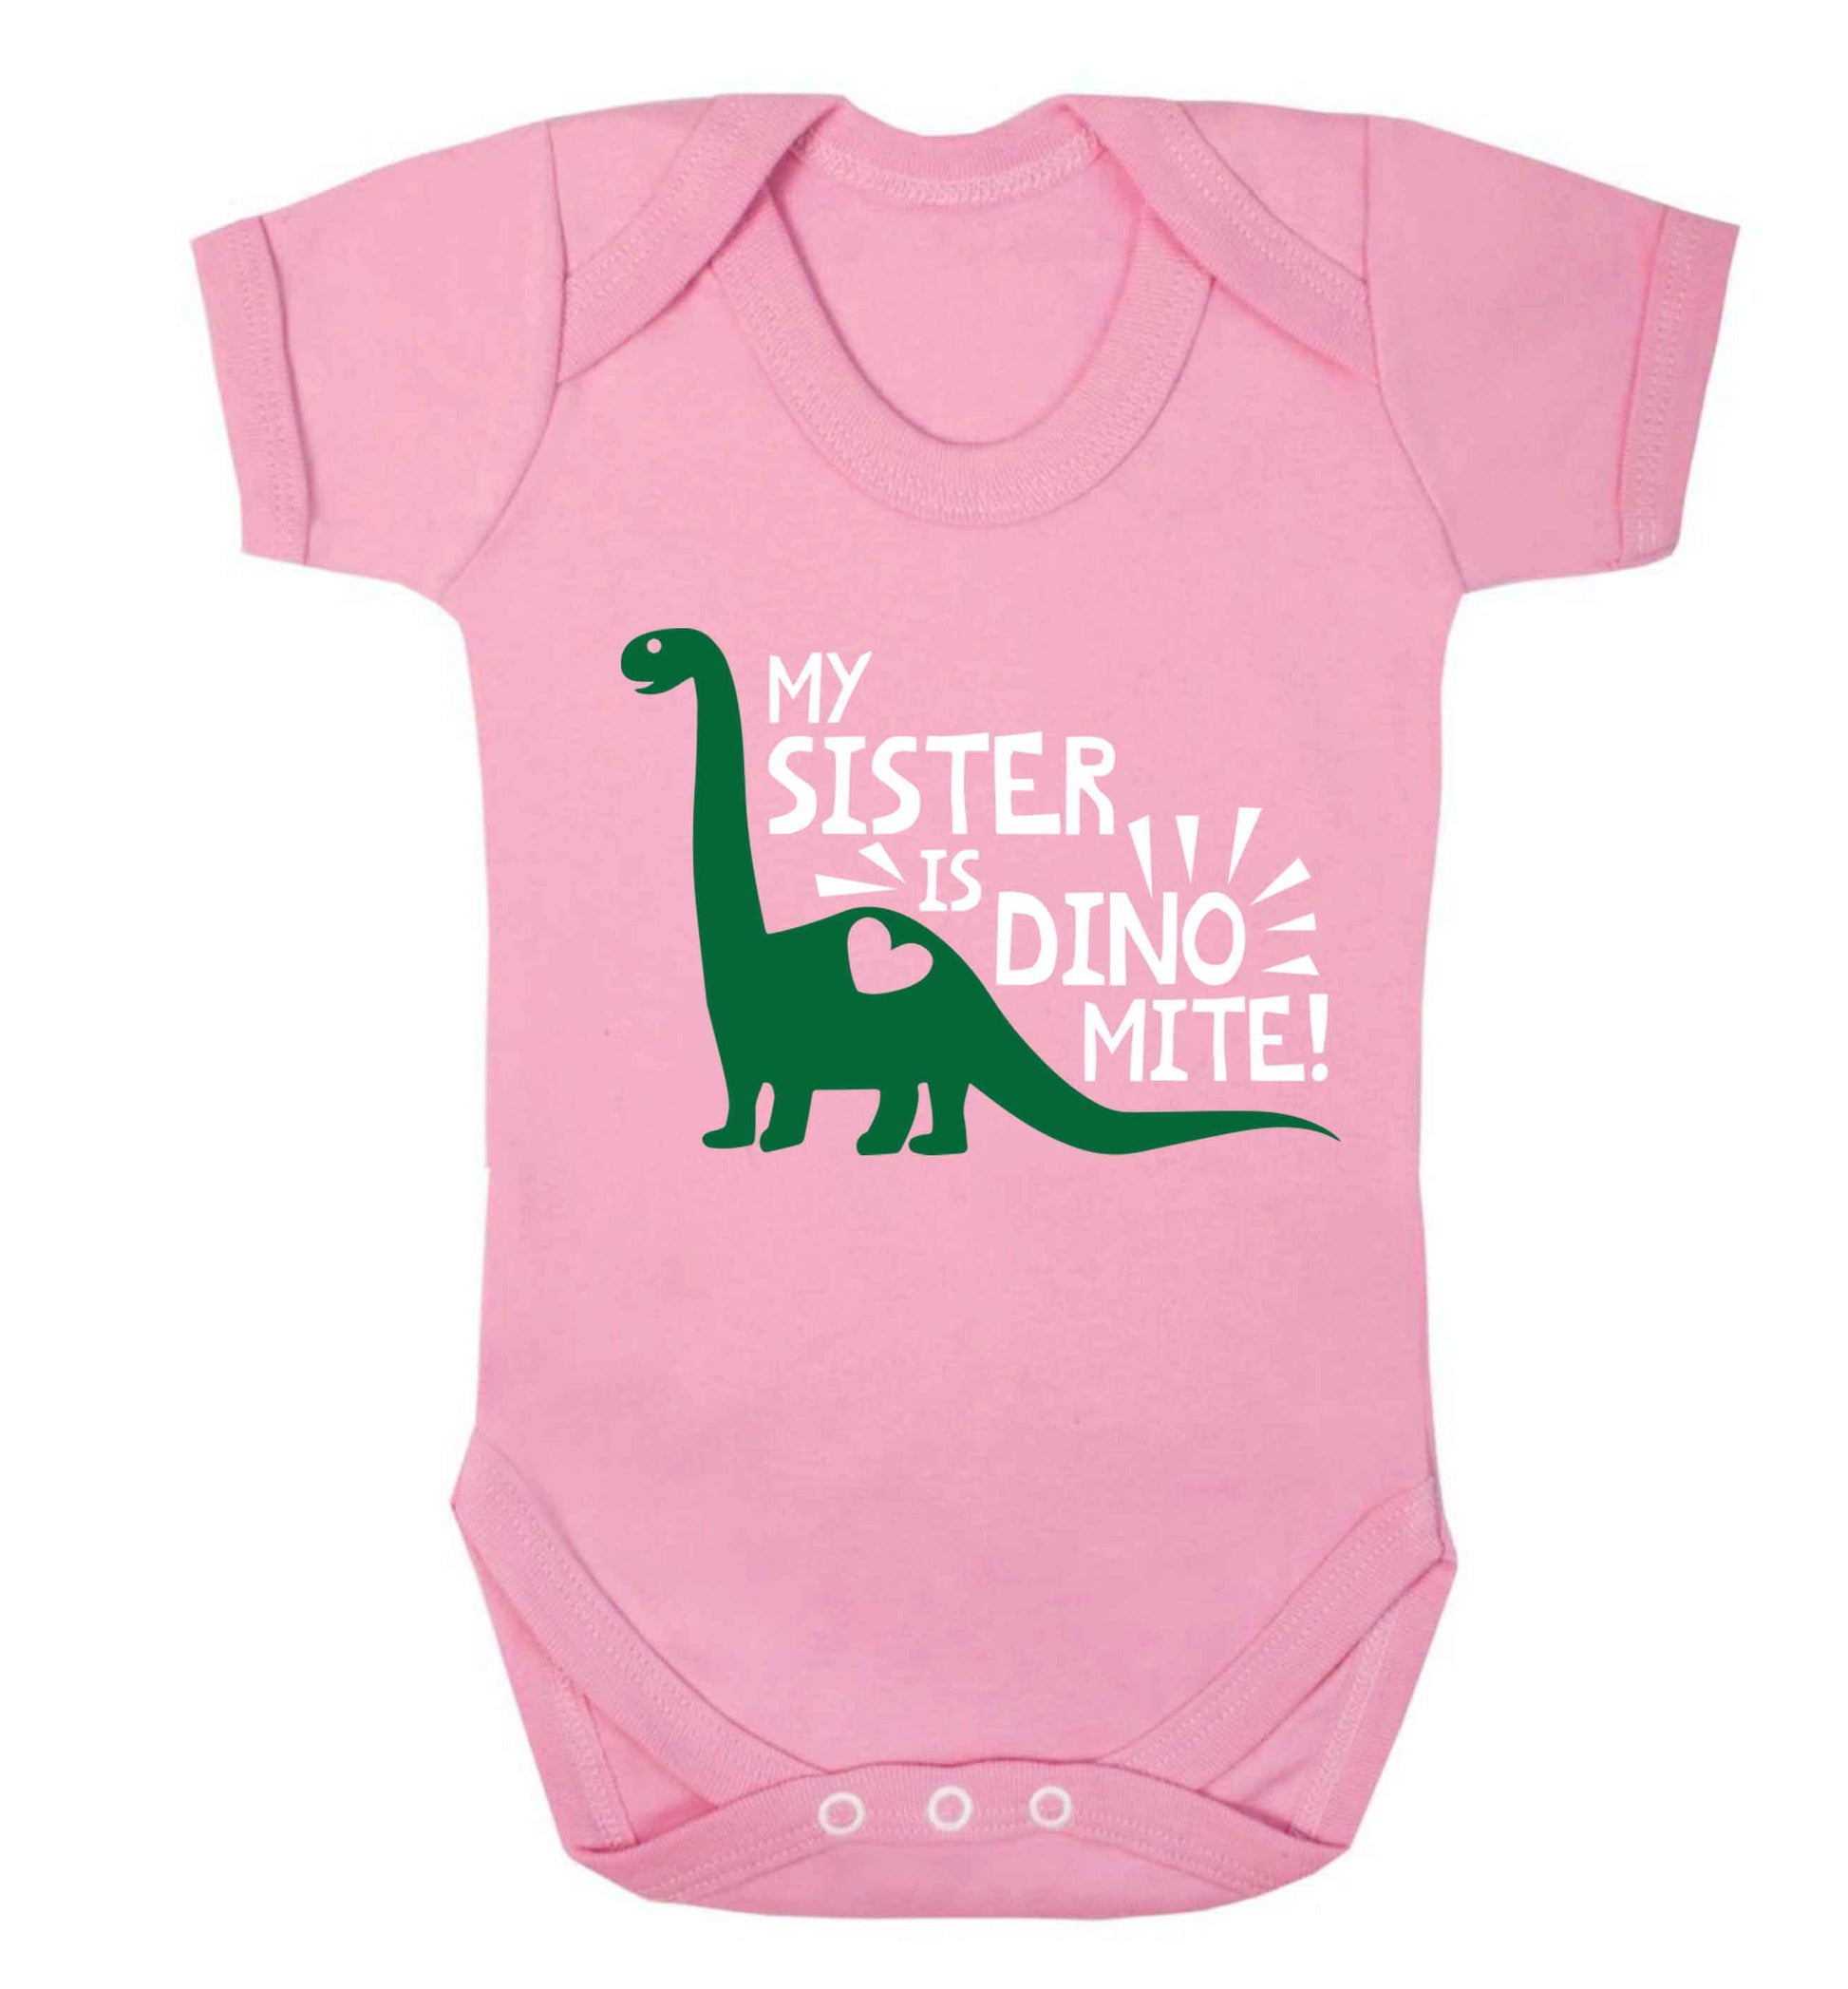 My sister is dinomite! Baby Vest pale pink 18-24 months